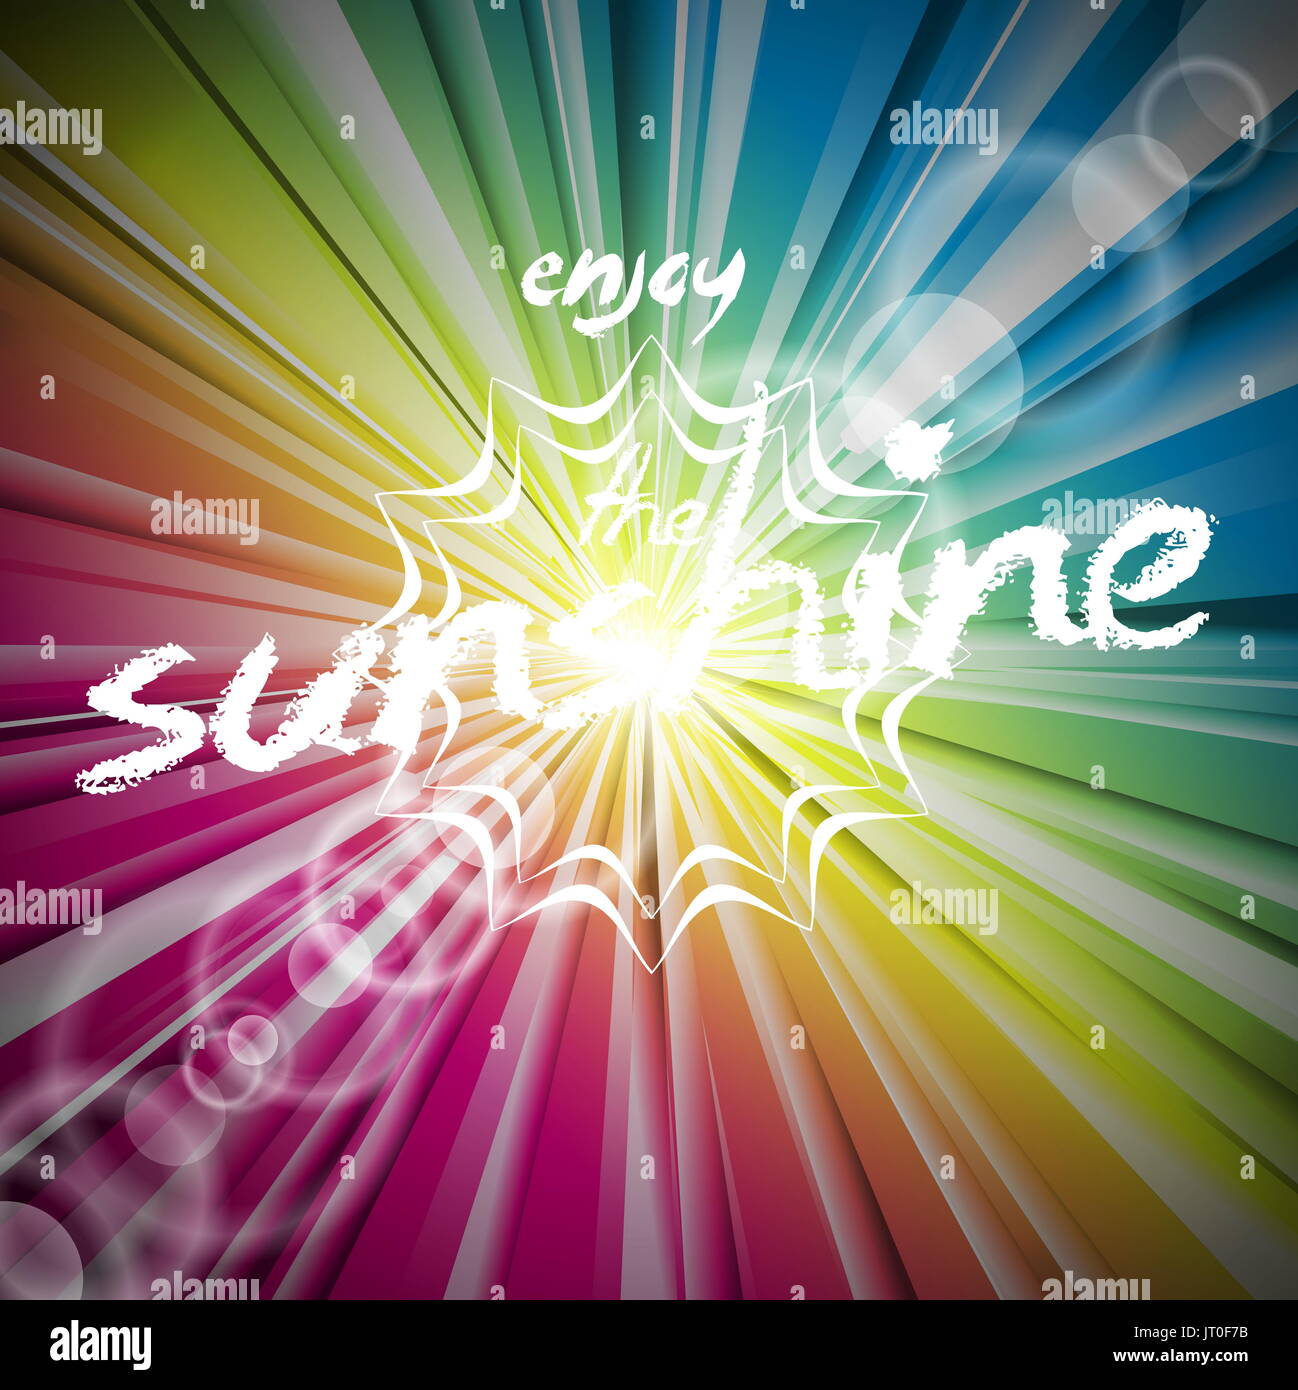 Abstract vector background brillant avec sun flare. Illustration 10 EPS. Banque D'Images